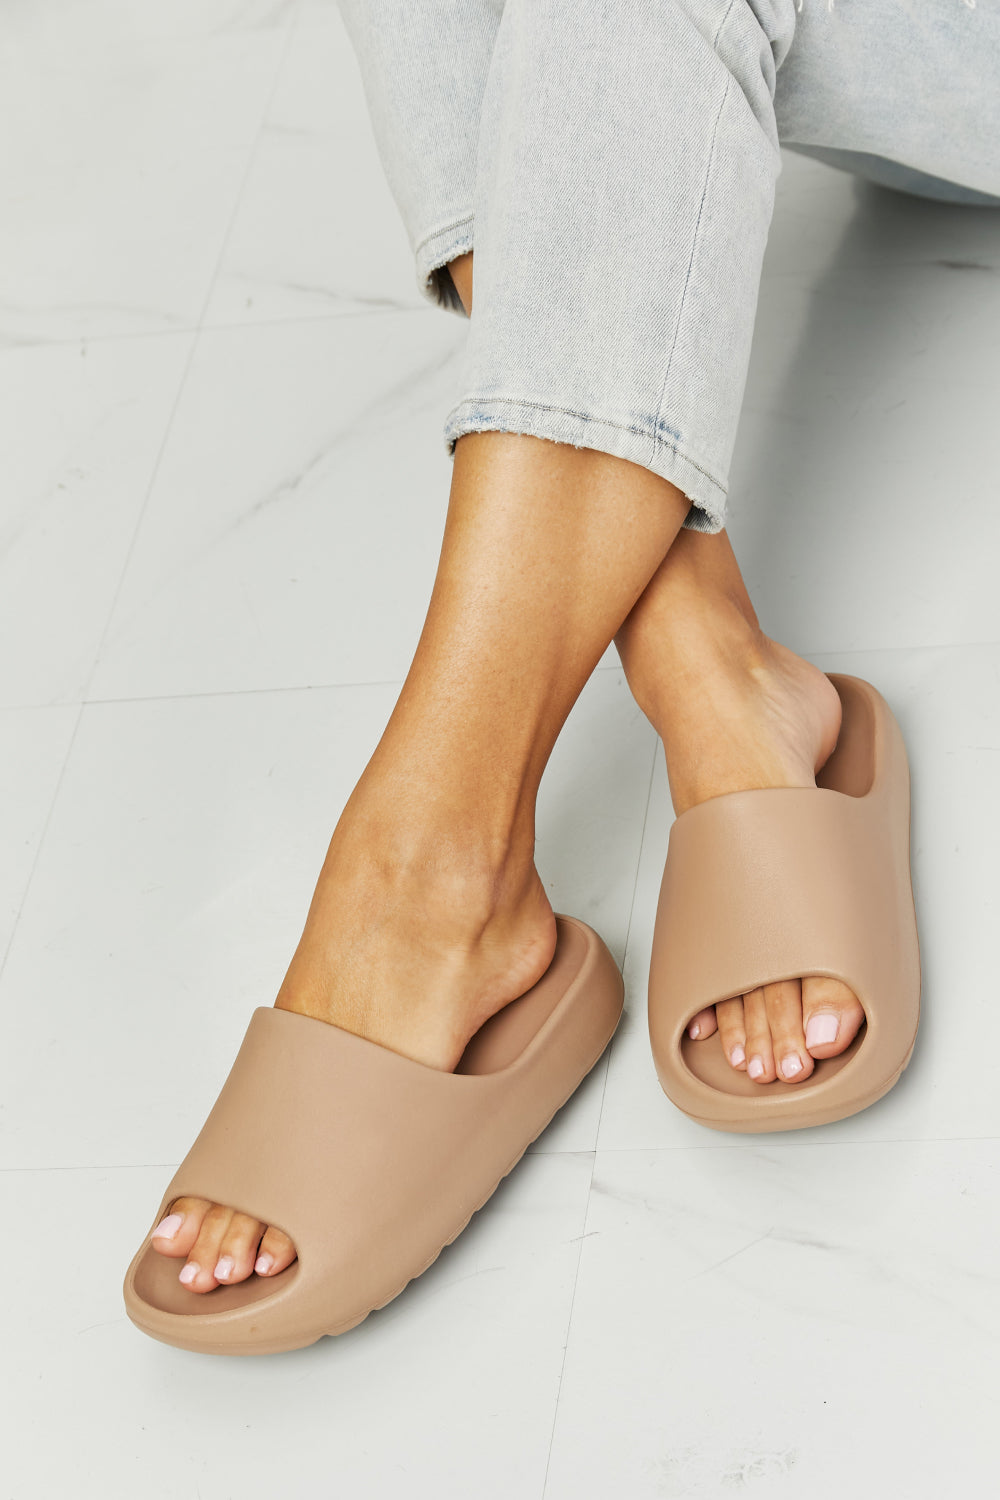 NOOK JOI In My Comfort Zone Slides in Beige - The Fashion Unicorn